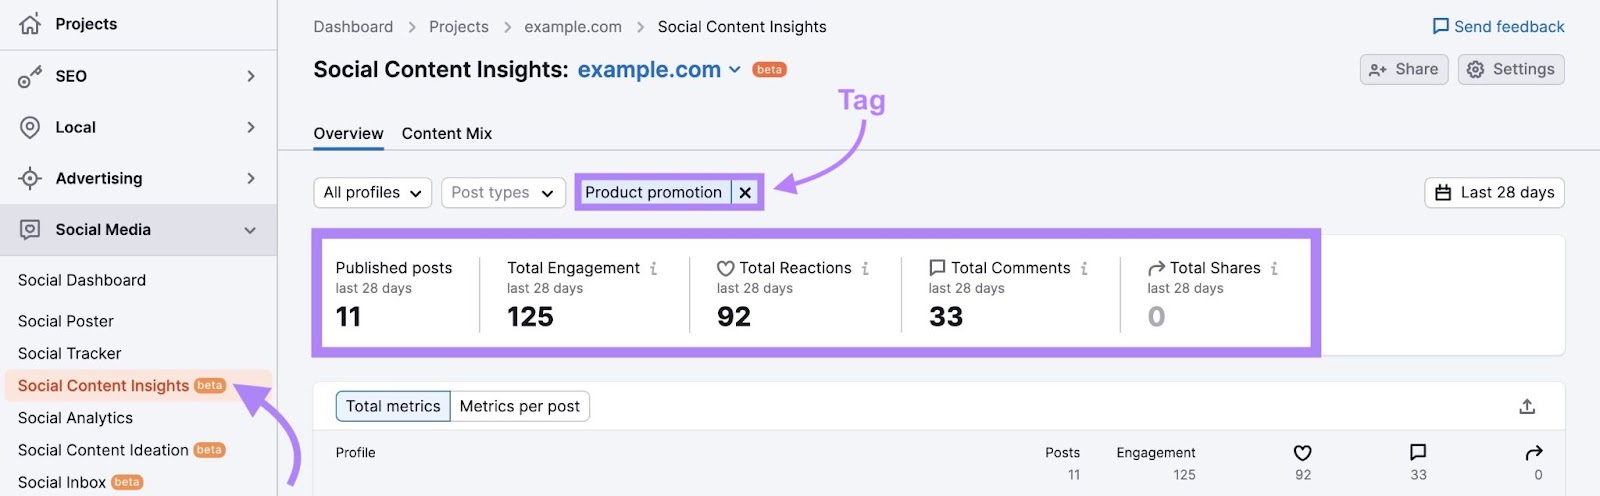 Semrush Social Content Insights with metrics displayed for posts with a specific tag.